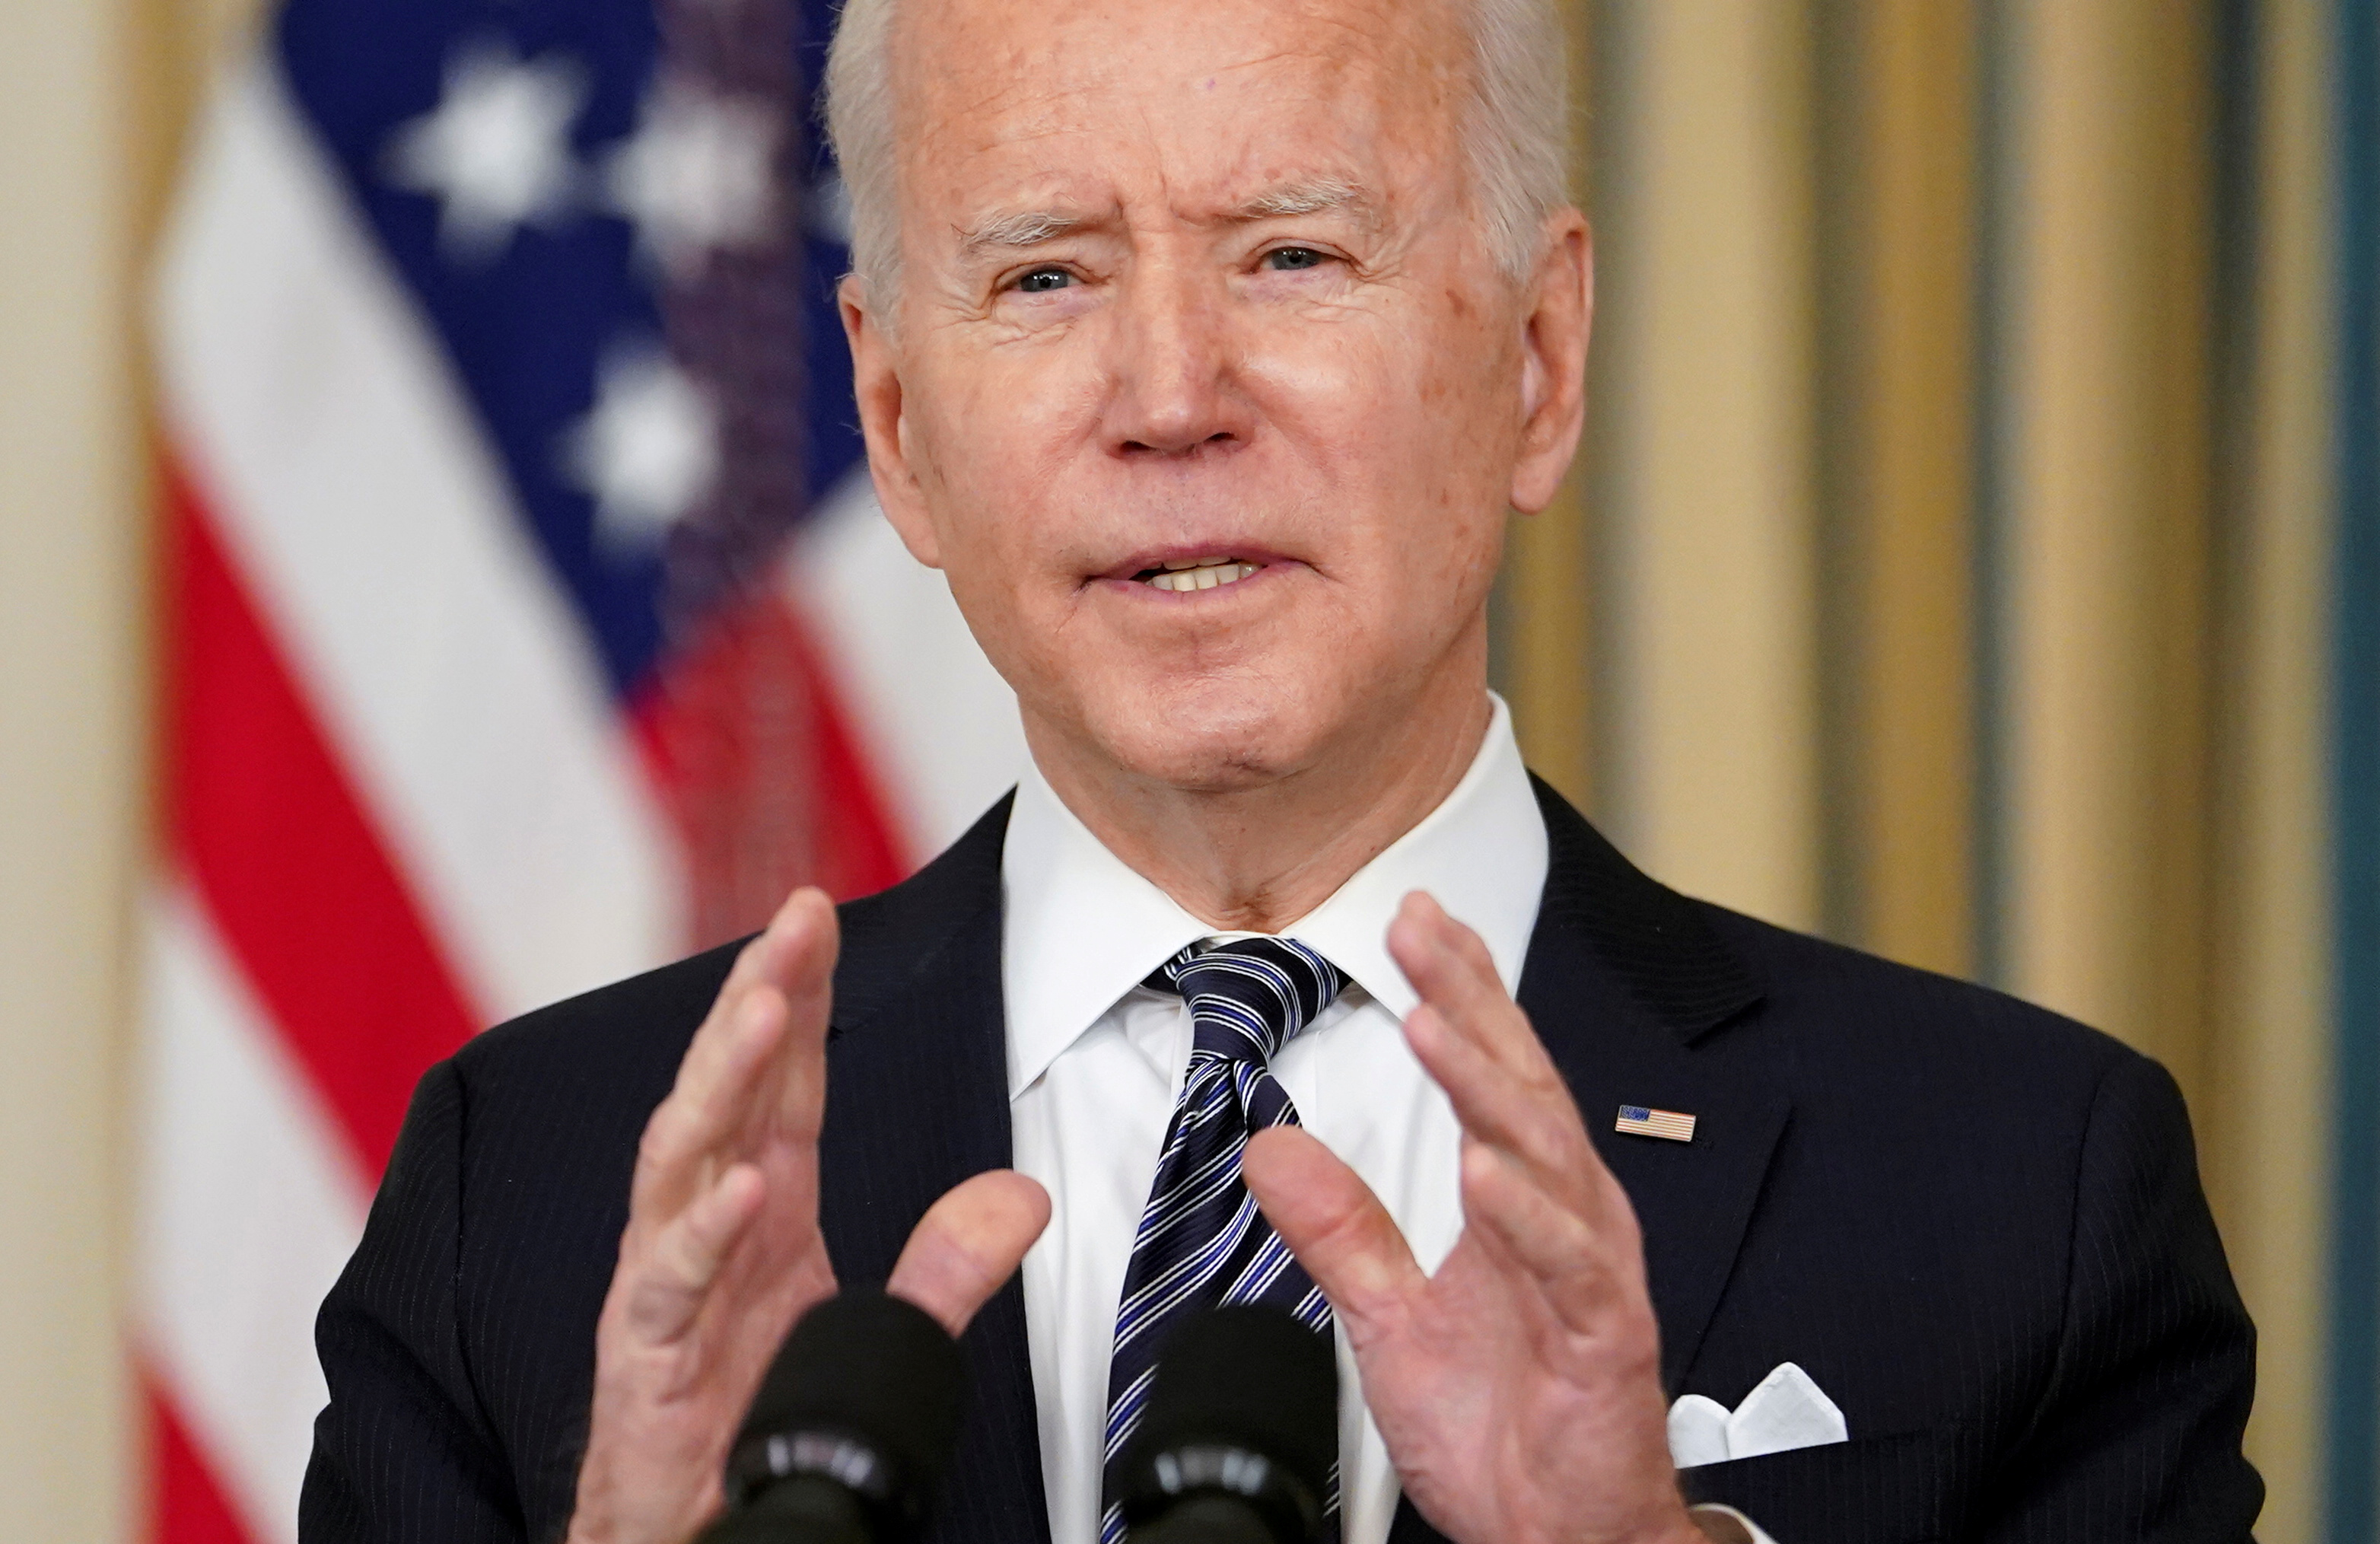 U.S. President Biden discusses implementation of American Rescue Plan at the White House in Washington